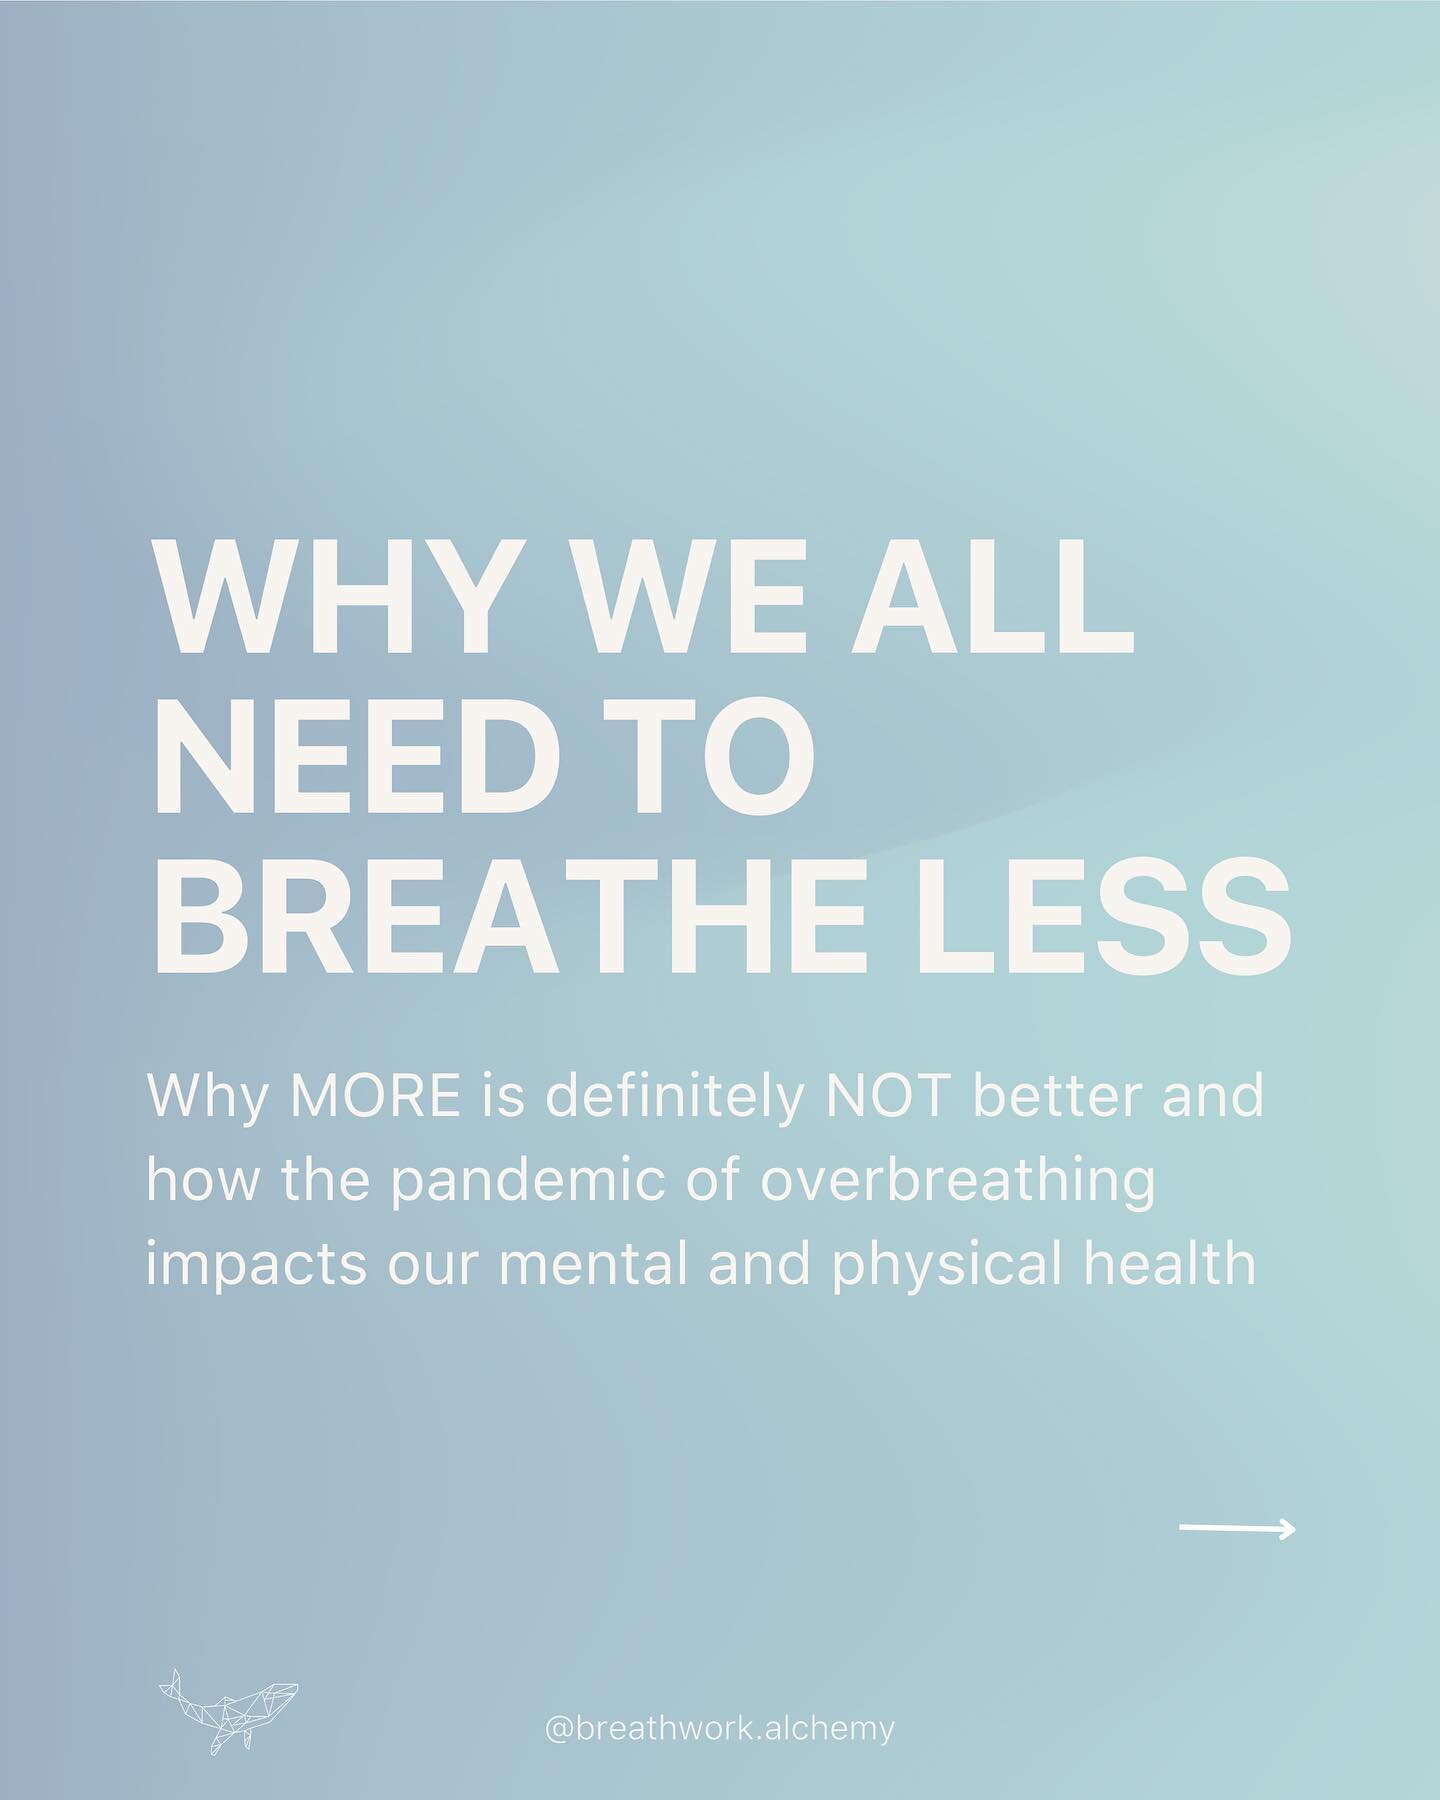 If you want to experience lasting results and effects from your daily breathwork practice, BREATHE LESS.

If you don&rsquo;t incorporate reduced breathing into your daily breathwork practice, you are really only getting temporary results.

The soluti